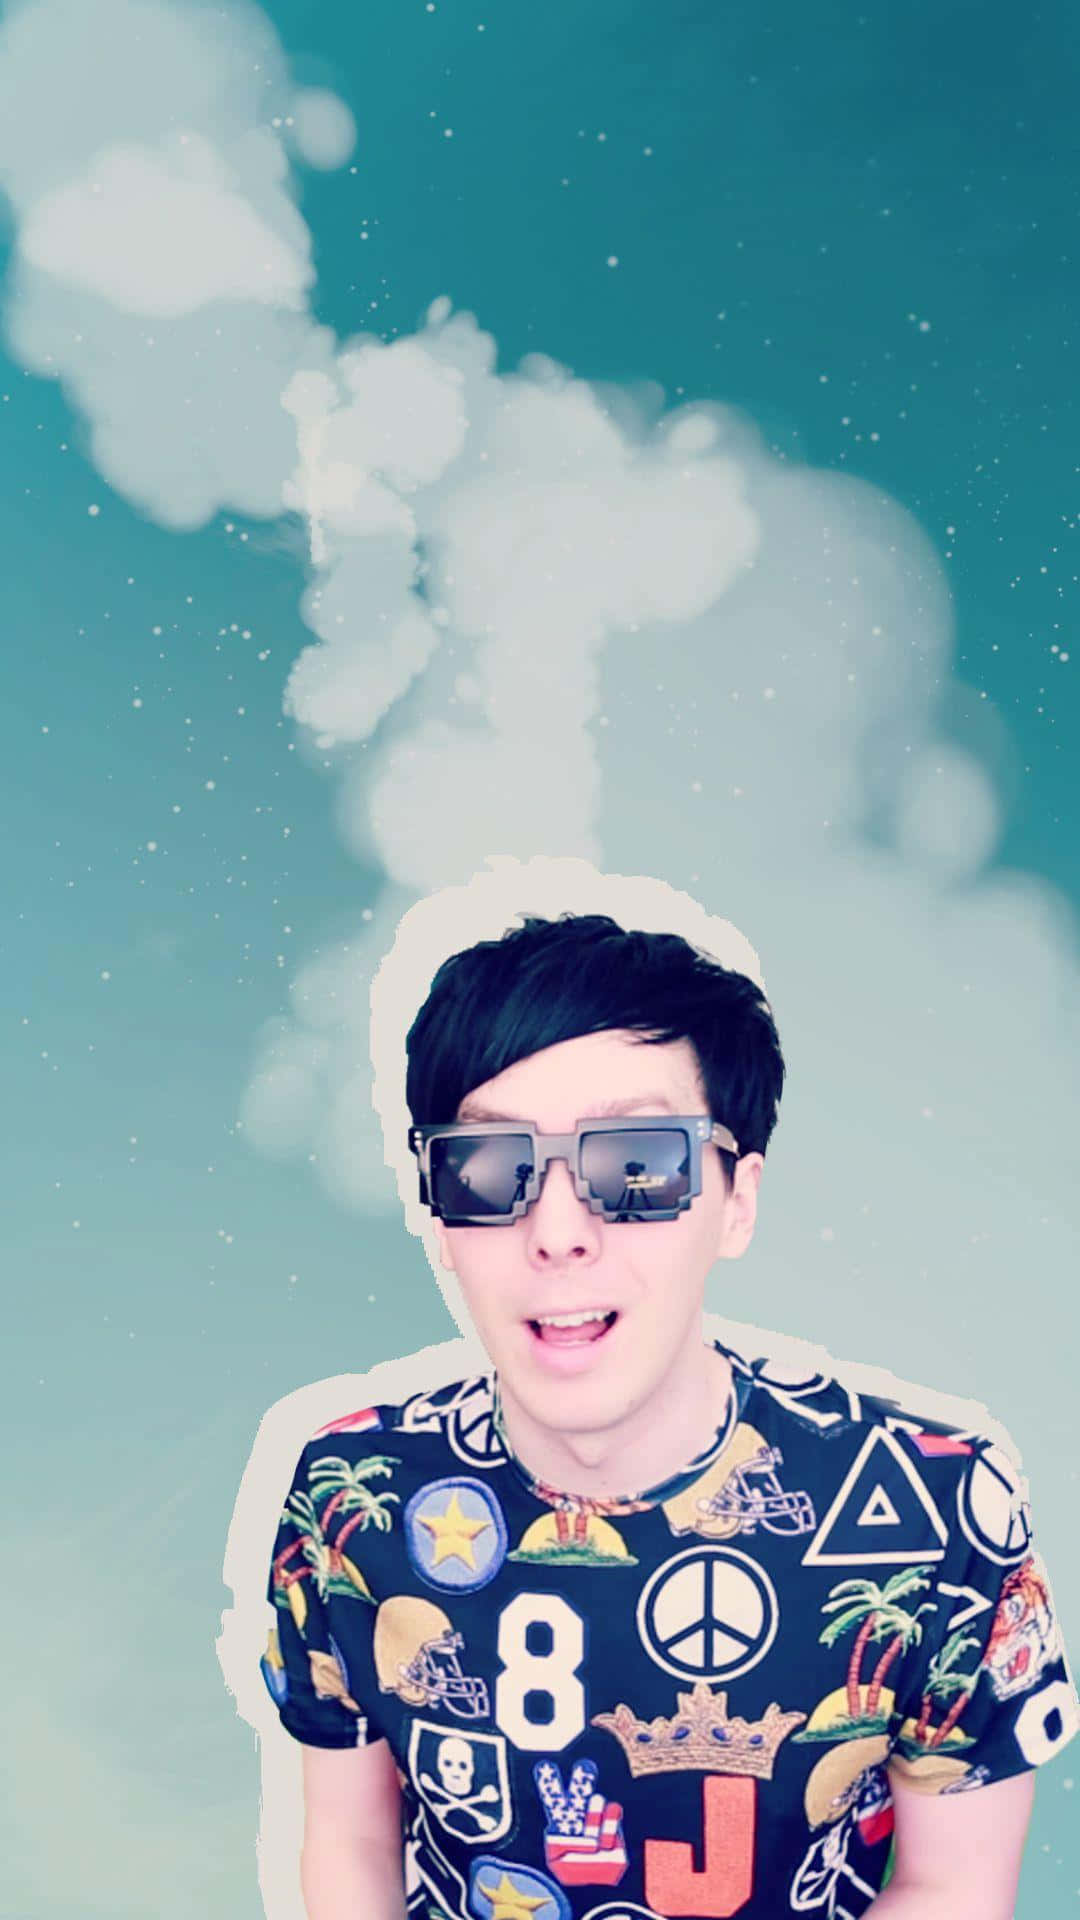 Phil Of Dan And Phil With Sunglasses Background